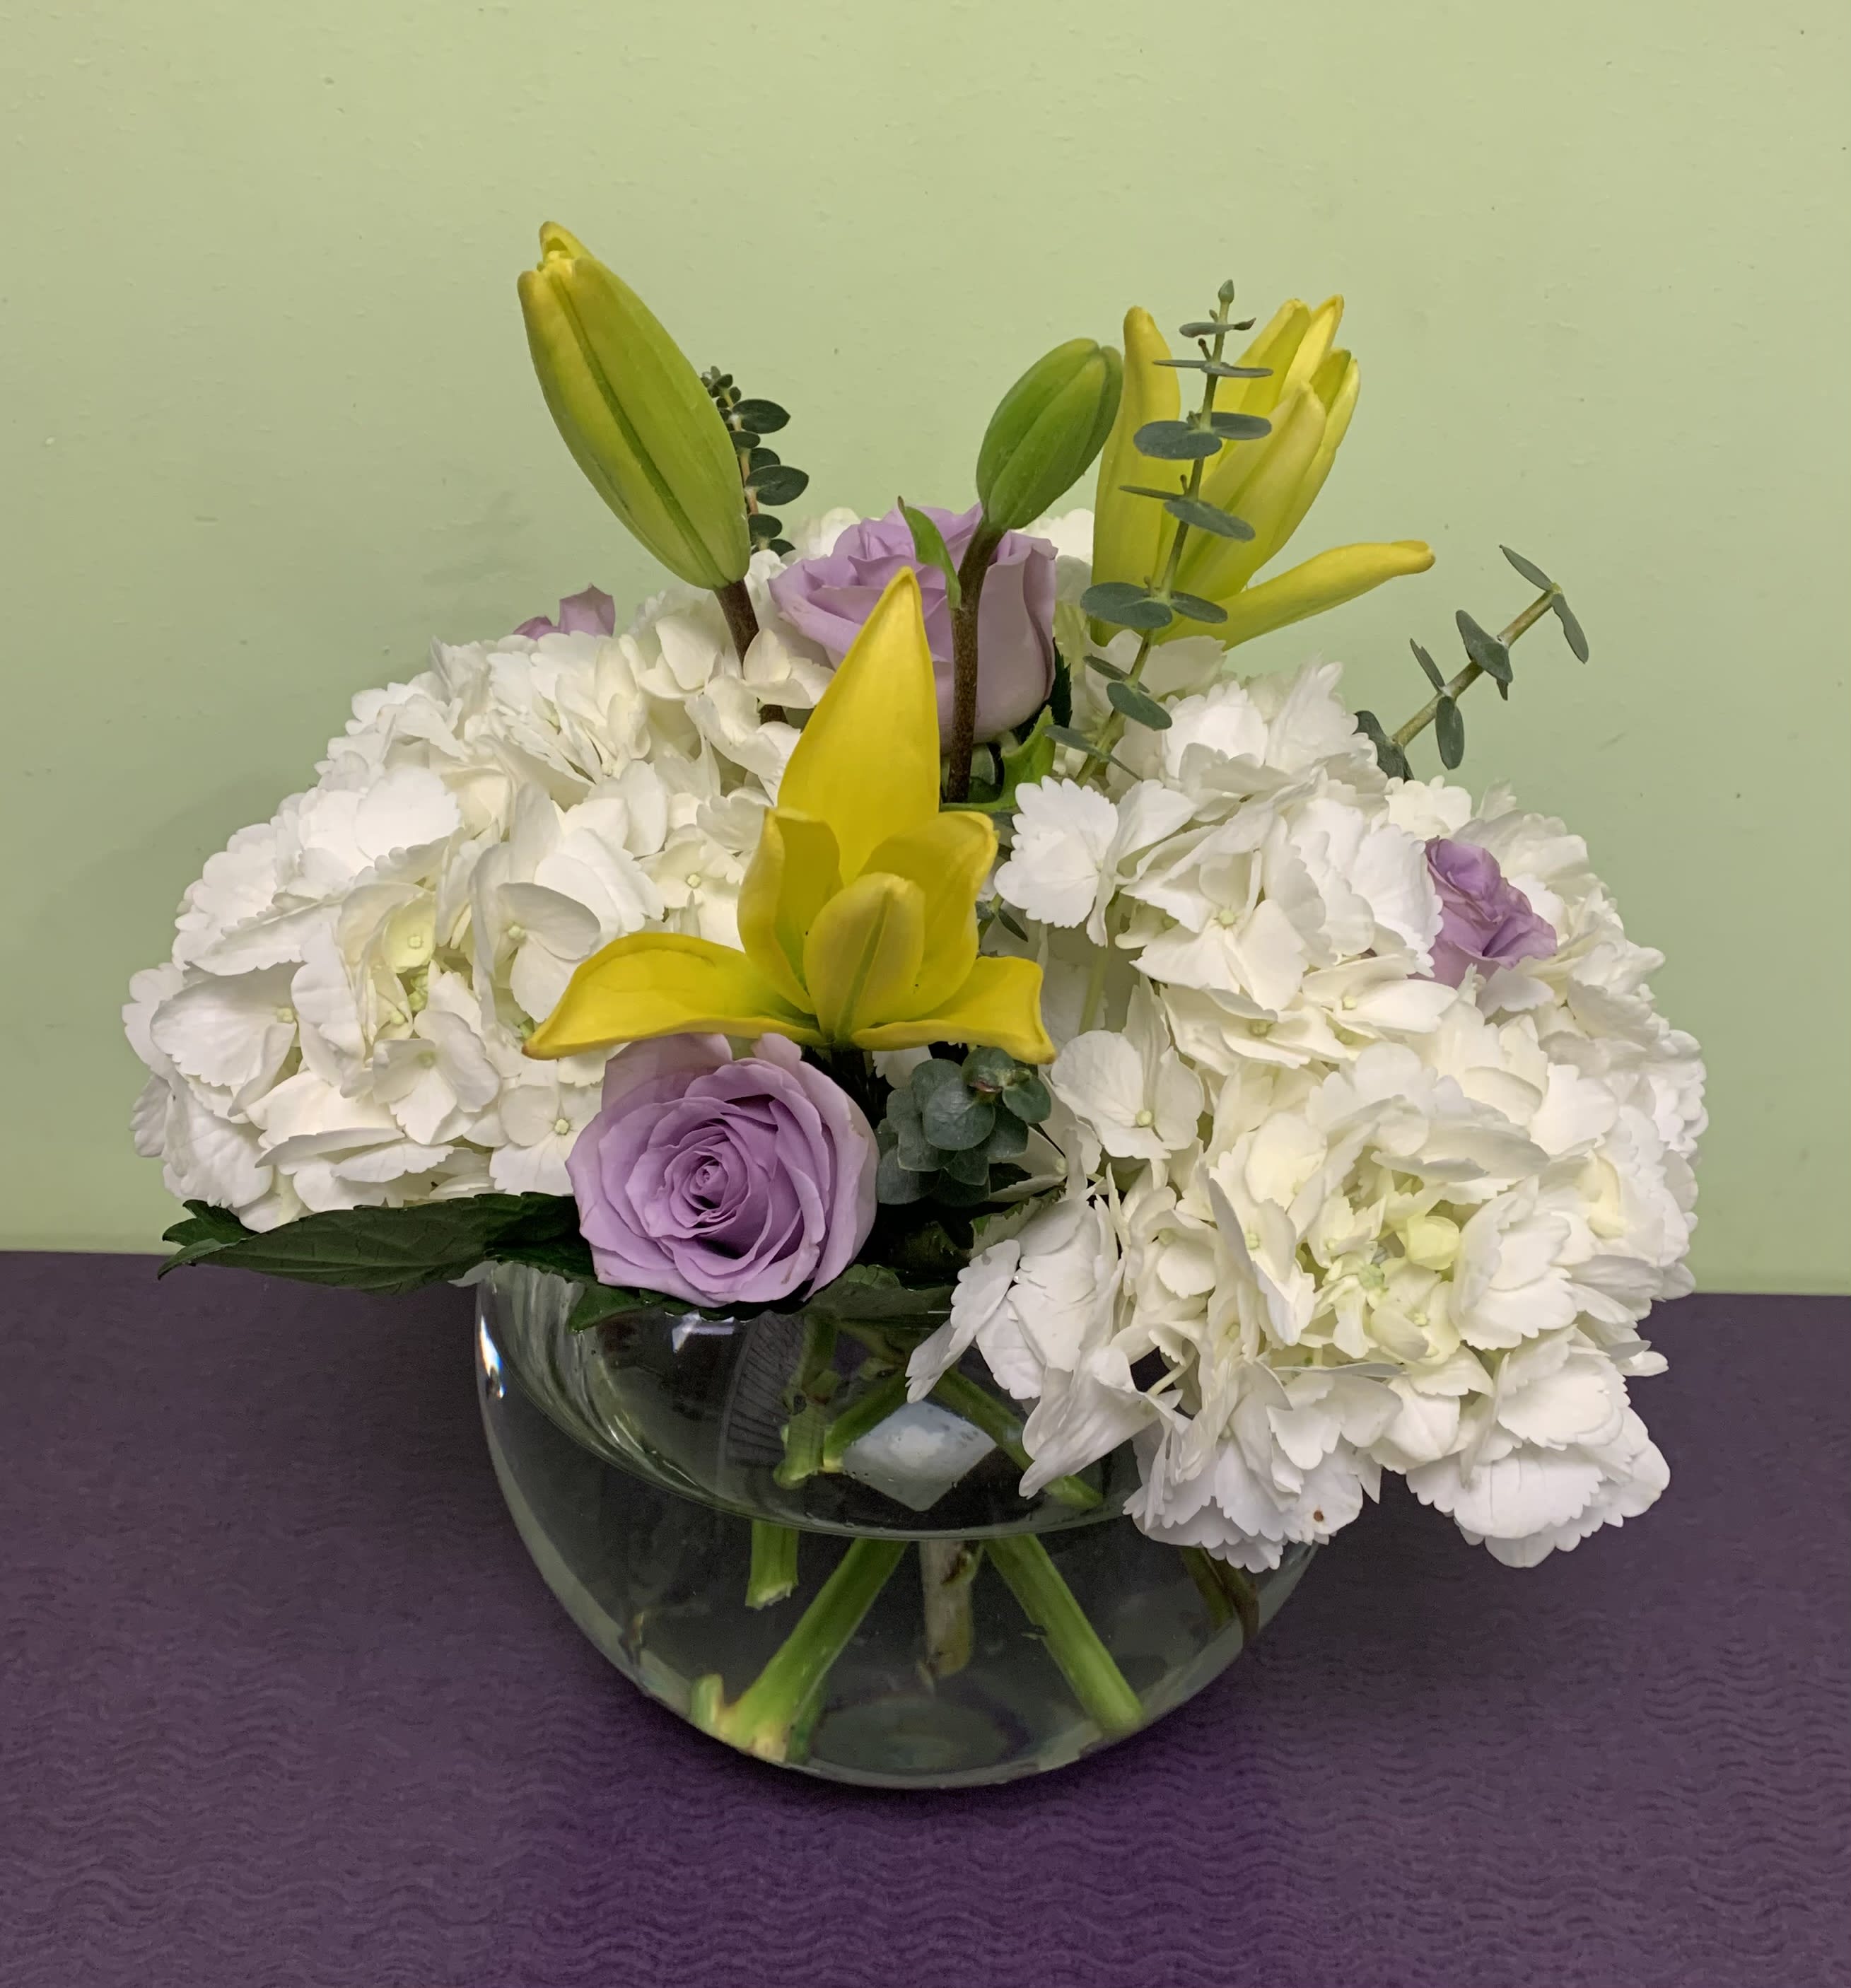 Blooming for Spring - The perfect arrangement for Spring! Springtime is the time where flowers bloom perfectly. Send the one you love a blooming arrangement that is full of perfect springtime flowers, Roses, Hydrangeas, and Lilies!